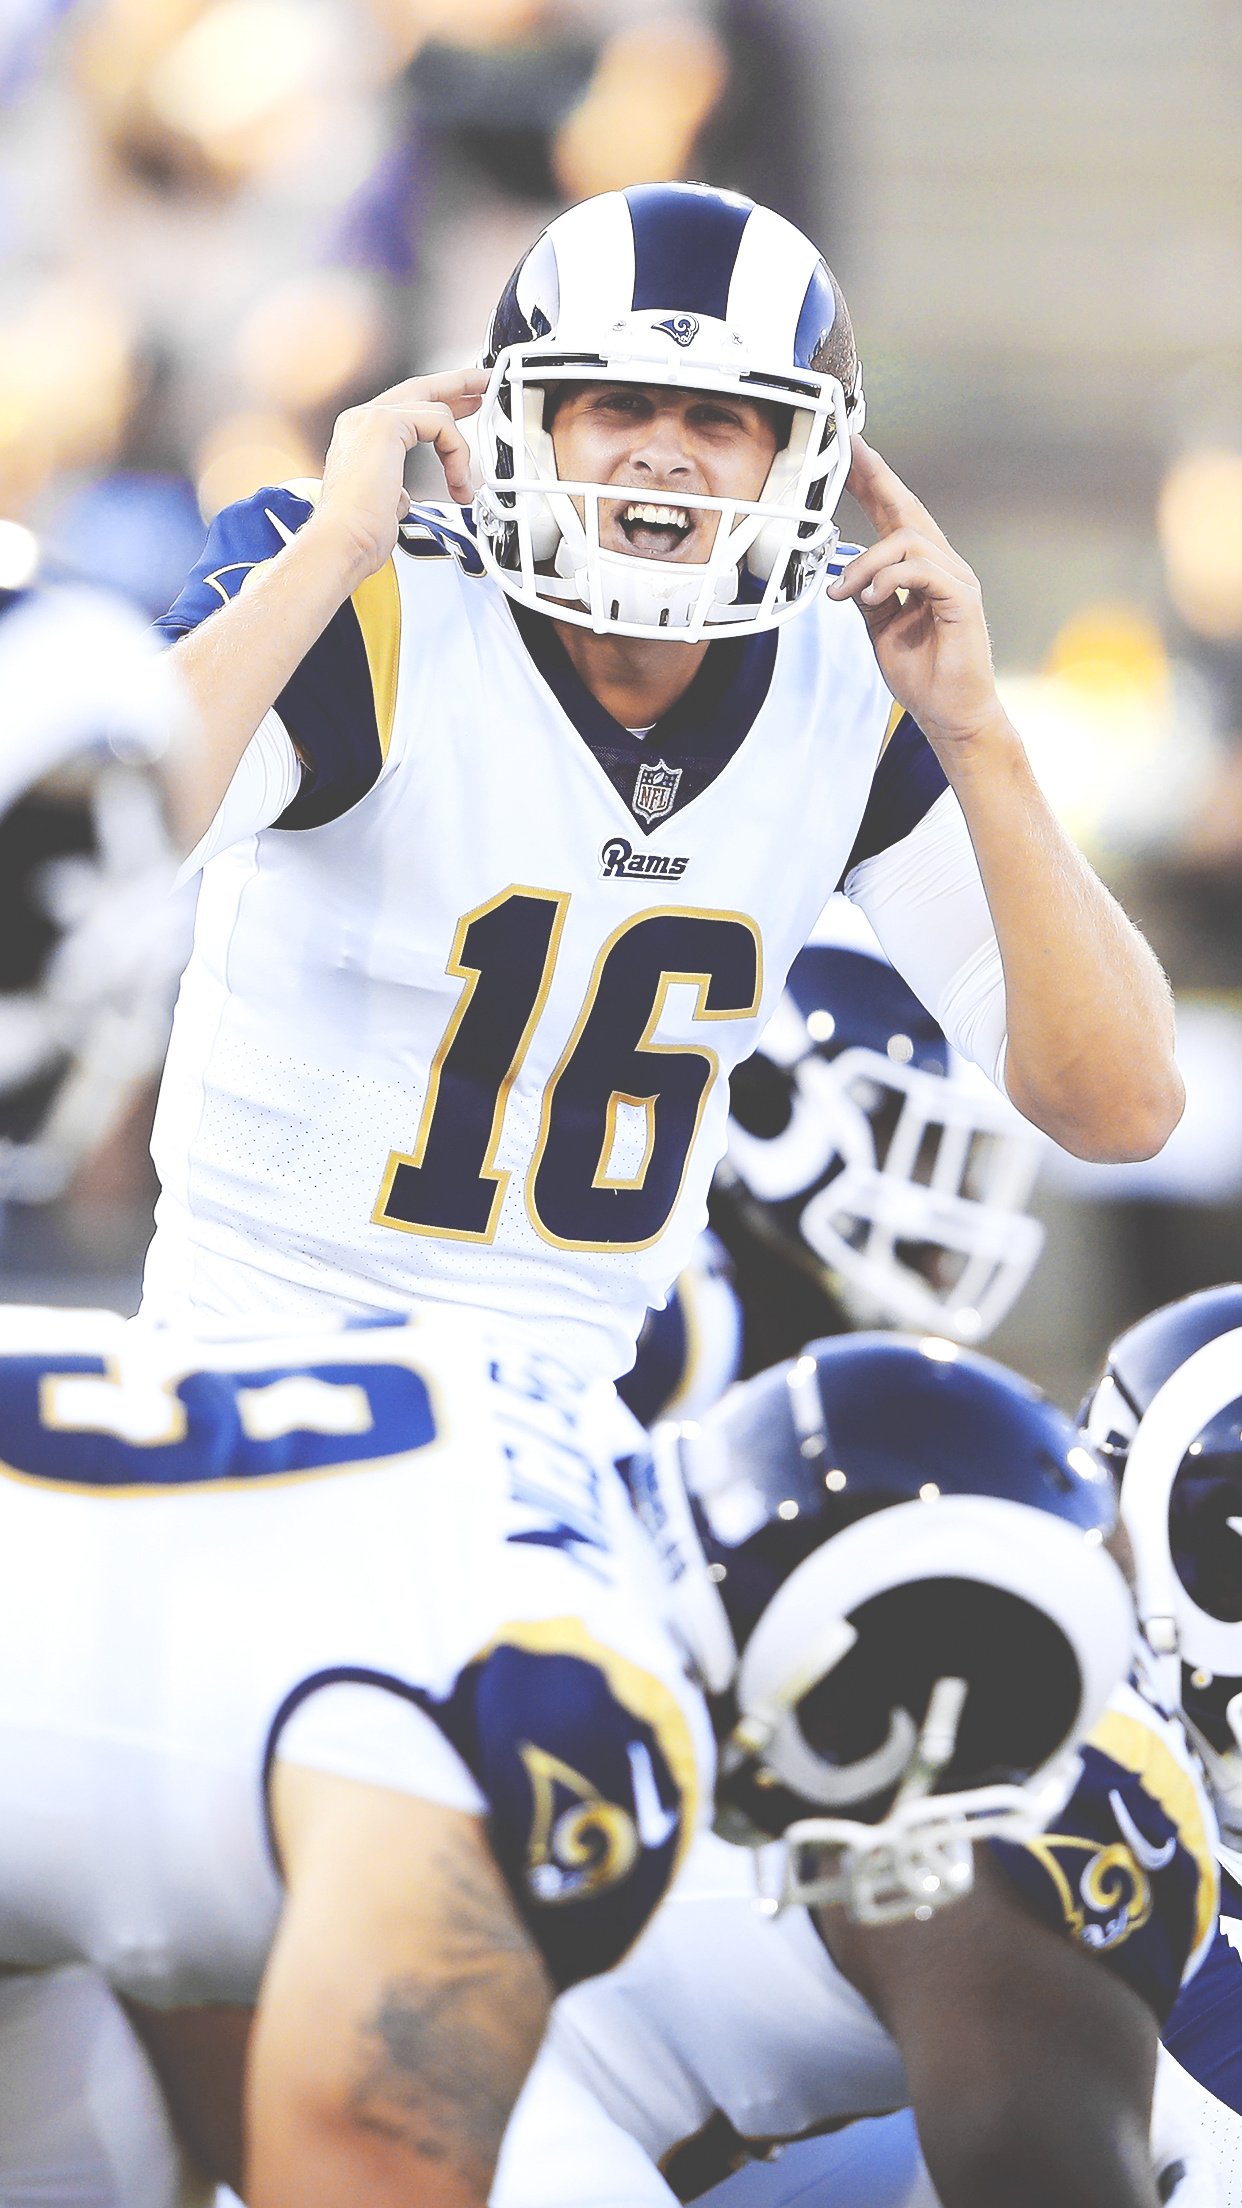 Los Angeles Rams, Sports team, iPhone wallpapers, Team backgrounds, 1250x2210 HD Handy